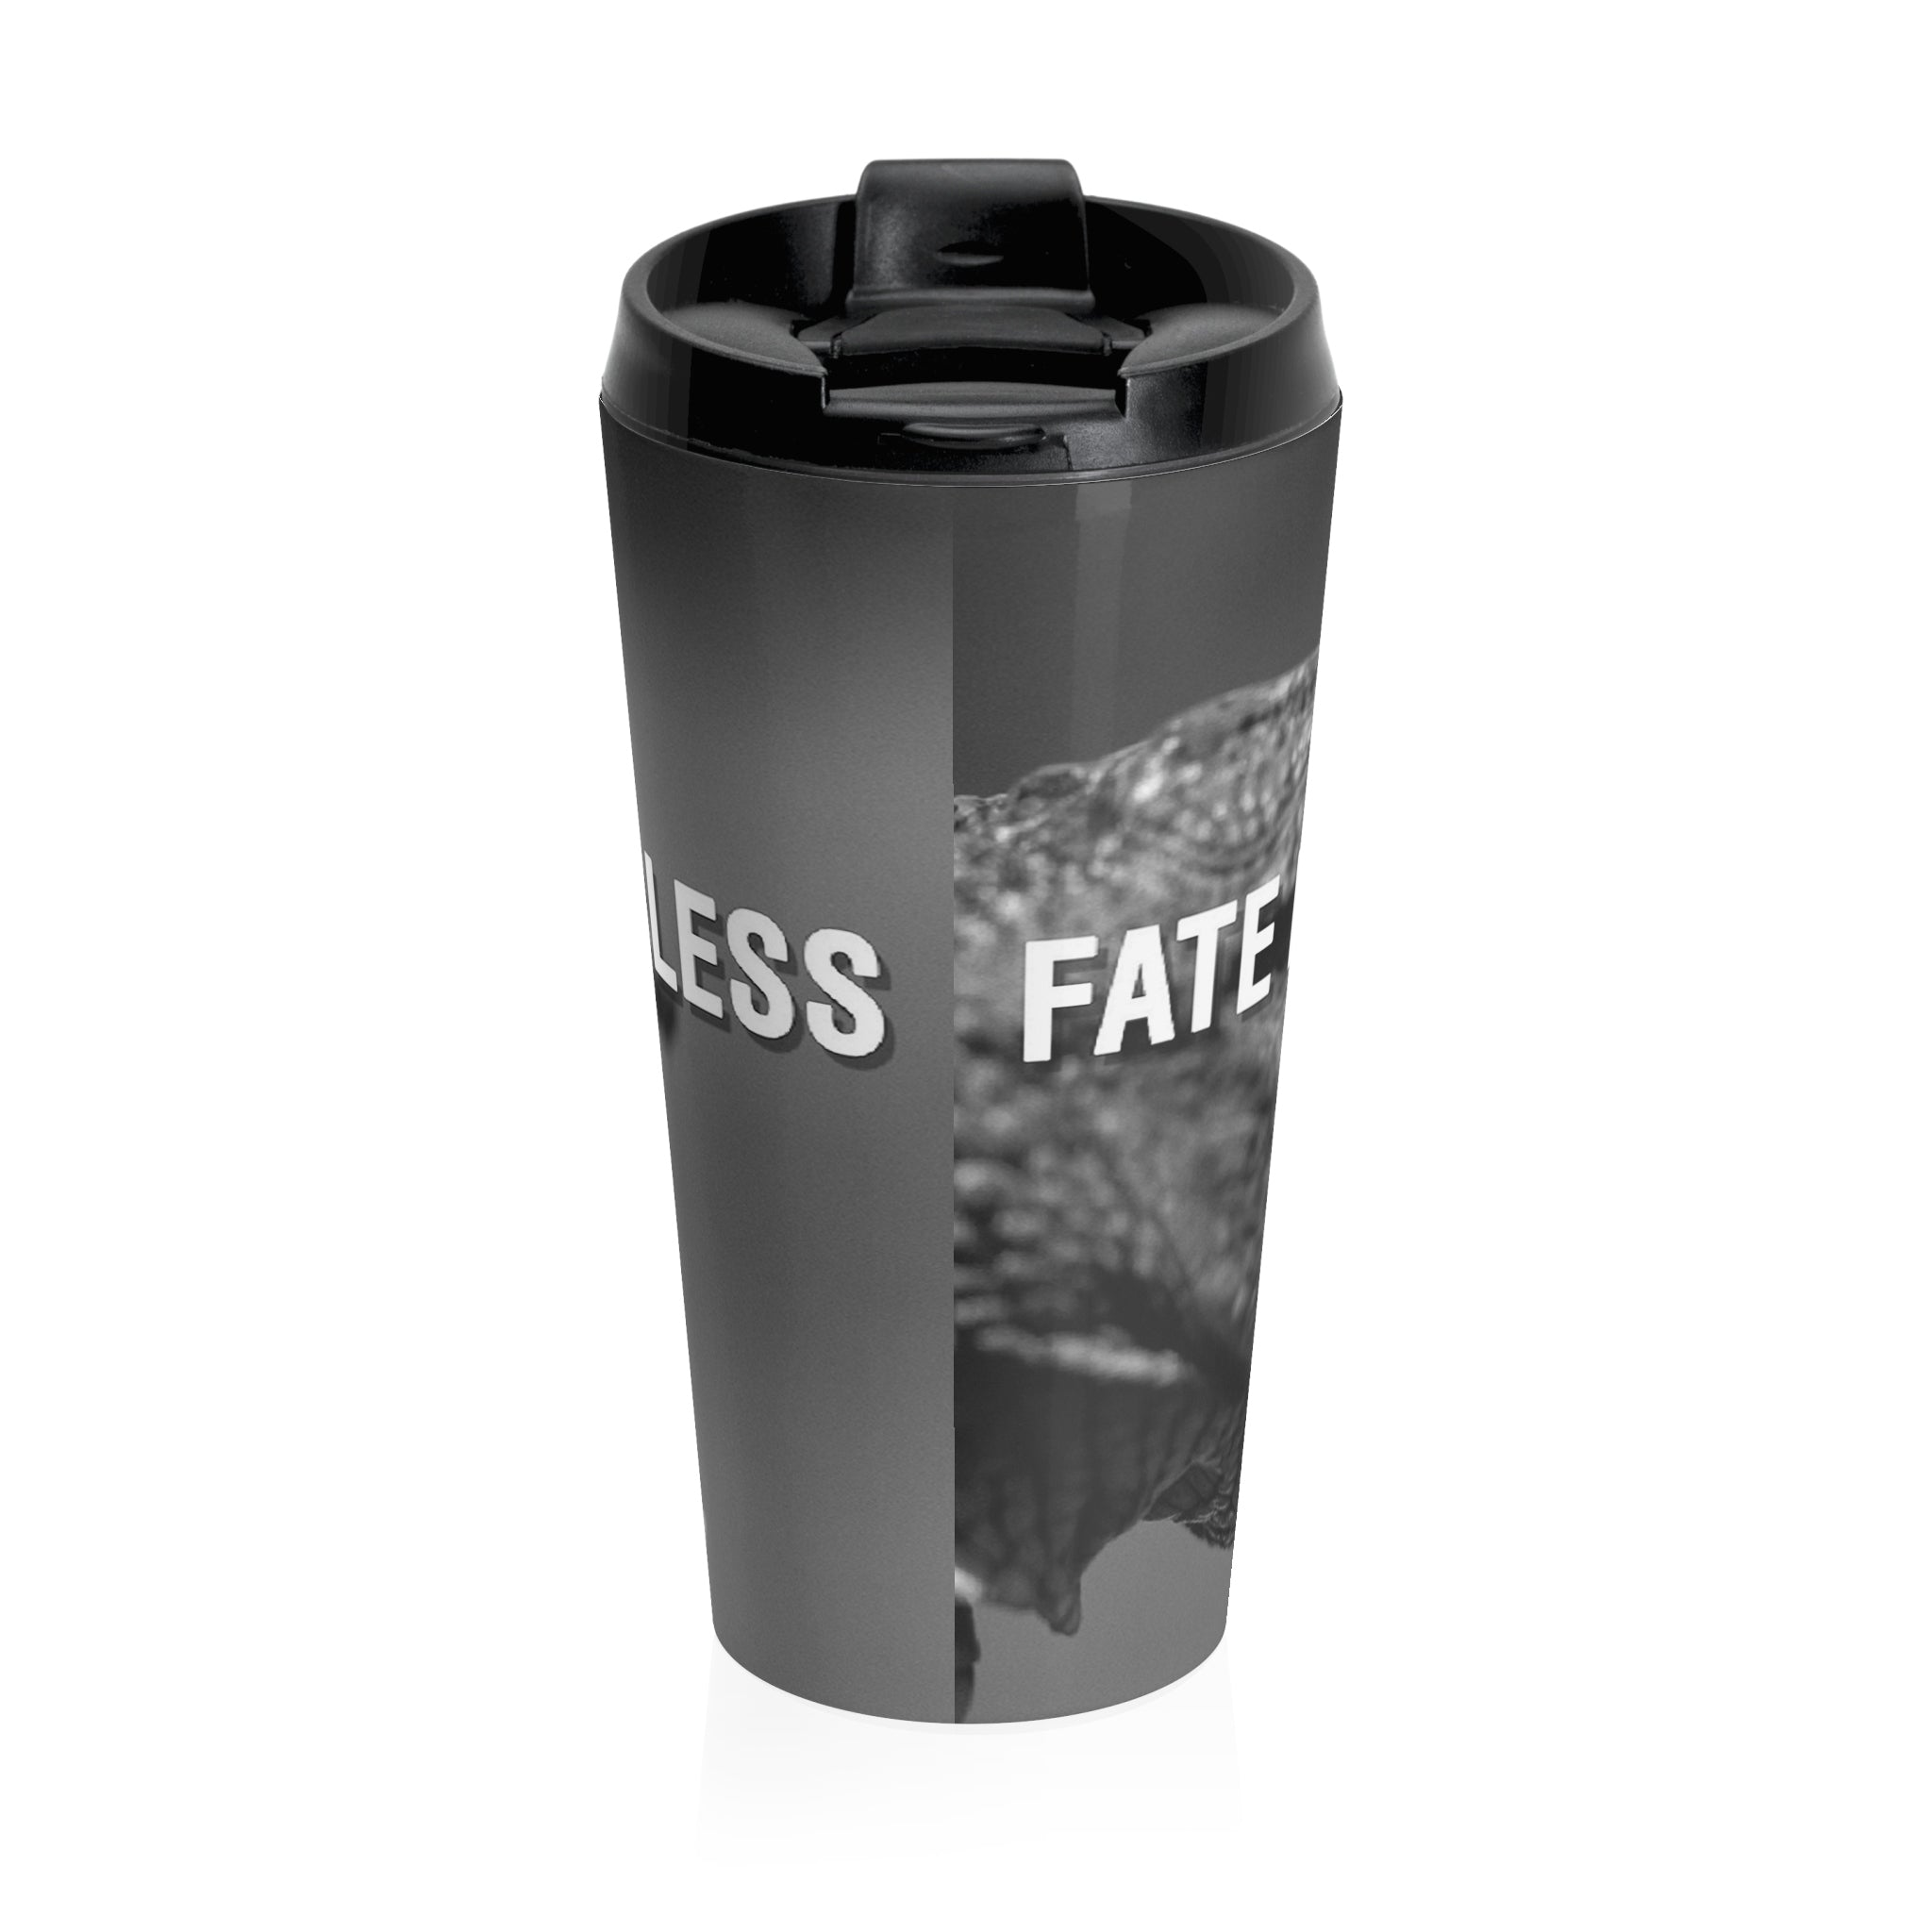 Fate loves the fearless Quote Stainless Steel Travel Mug